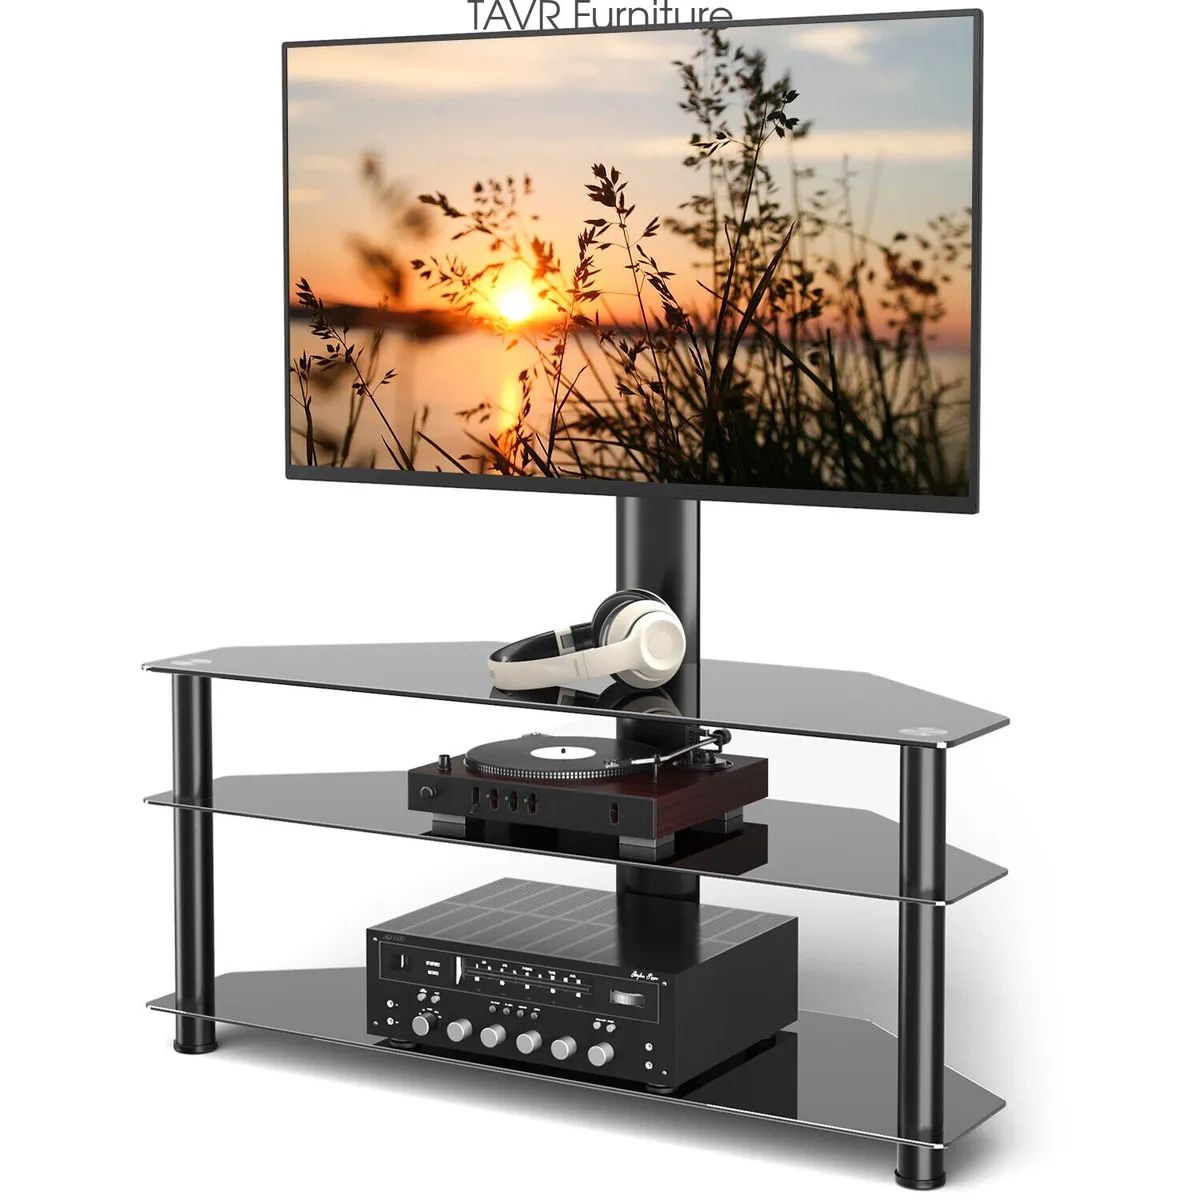 Swivel Corner Tv Stand With Height Adjustable Mount For 32 65" Flat Screen  Tv | Ebay For Stand For Flat Screen (View 6 of 15)